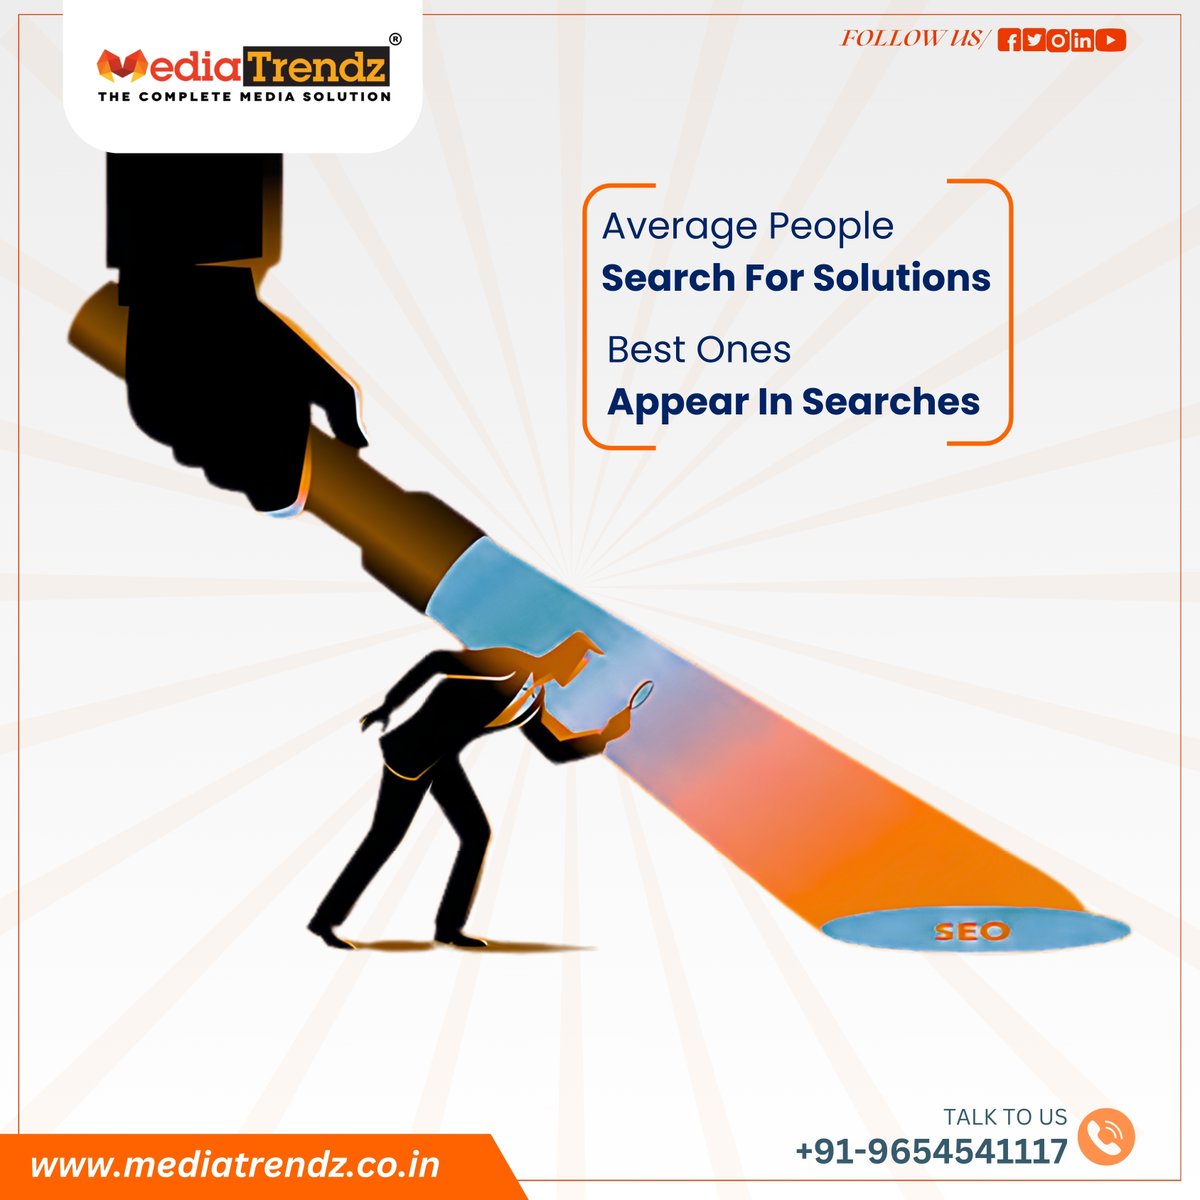 Unlock the power of SEO and watch your business soar
.
With average users constantly seeking solutions, ensure your brand stands out in searches.
.
#MediaTrendz #DigitalMarketing
#SEO #DigitalMarketing #StandOutInSearches #DigitalMarketing #SearchEngineOptimization #Online